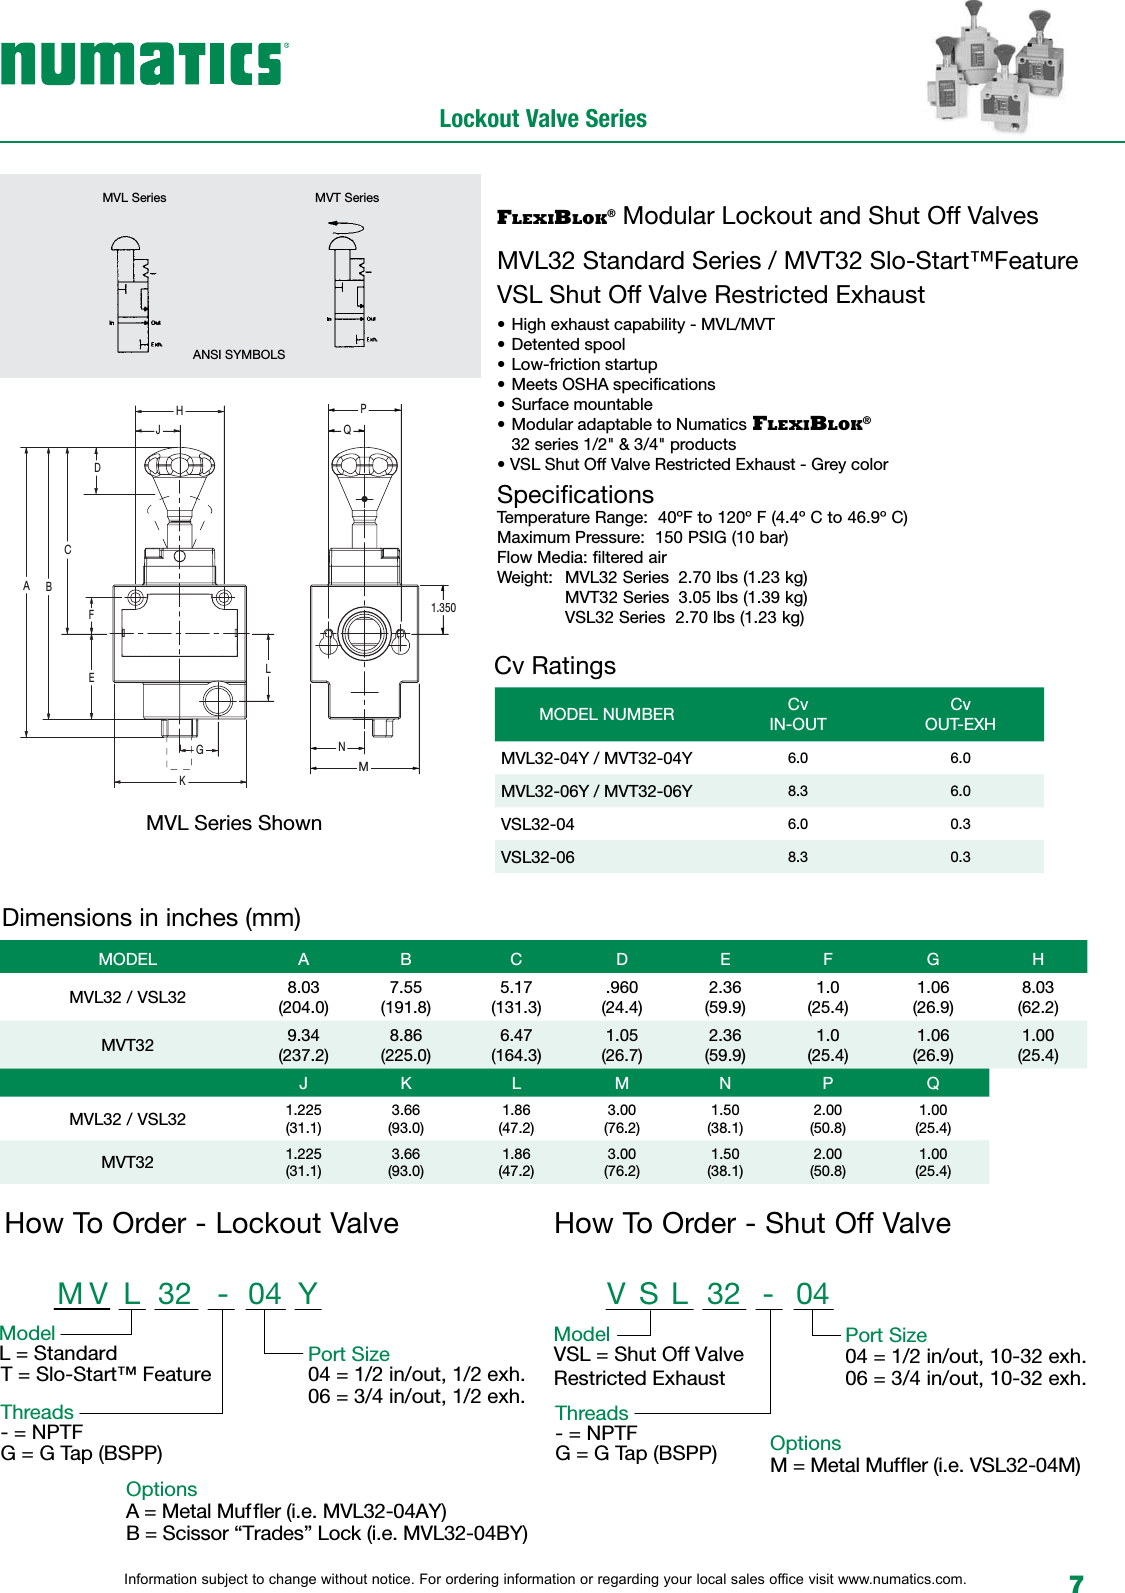 Page 9 of 12 - Flow Numatic Lockout Series-1505484633 User Manual